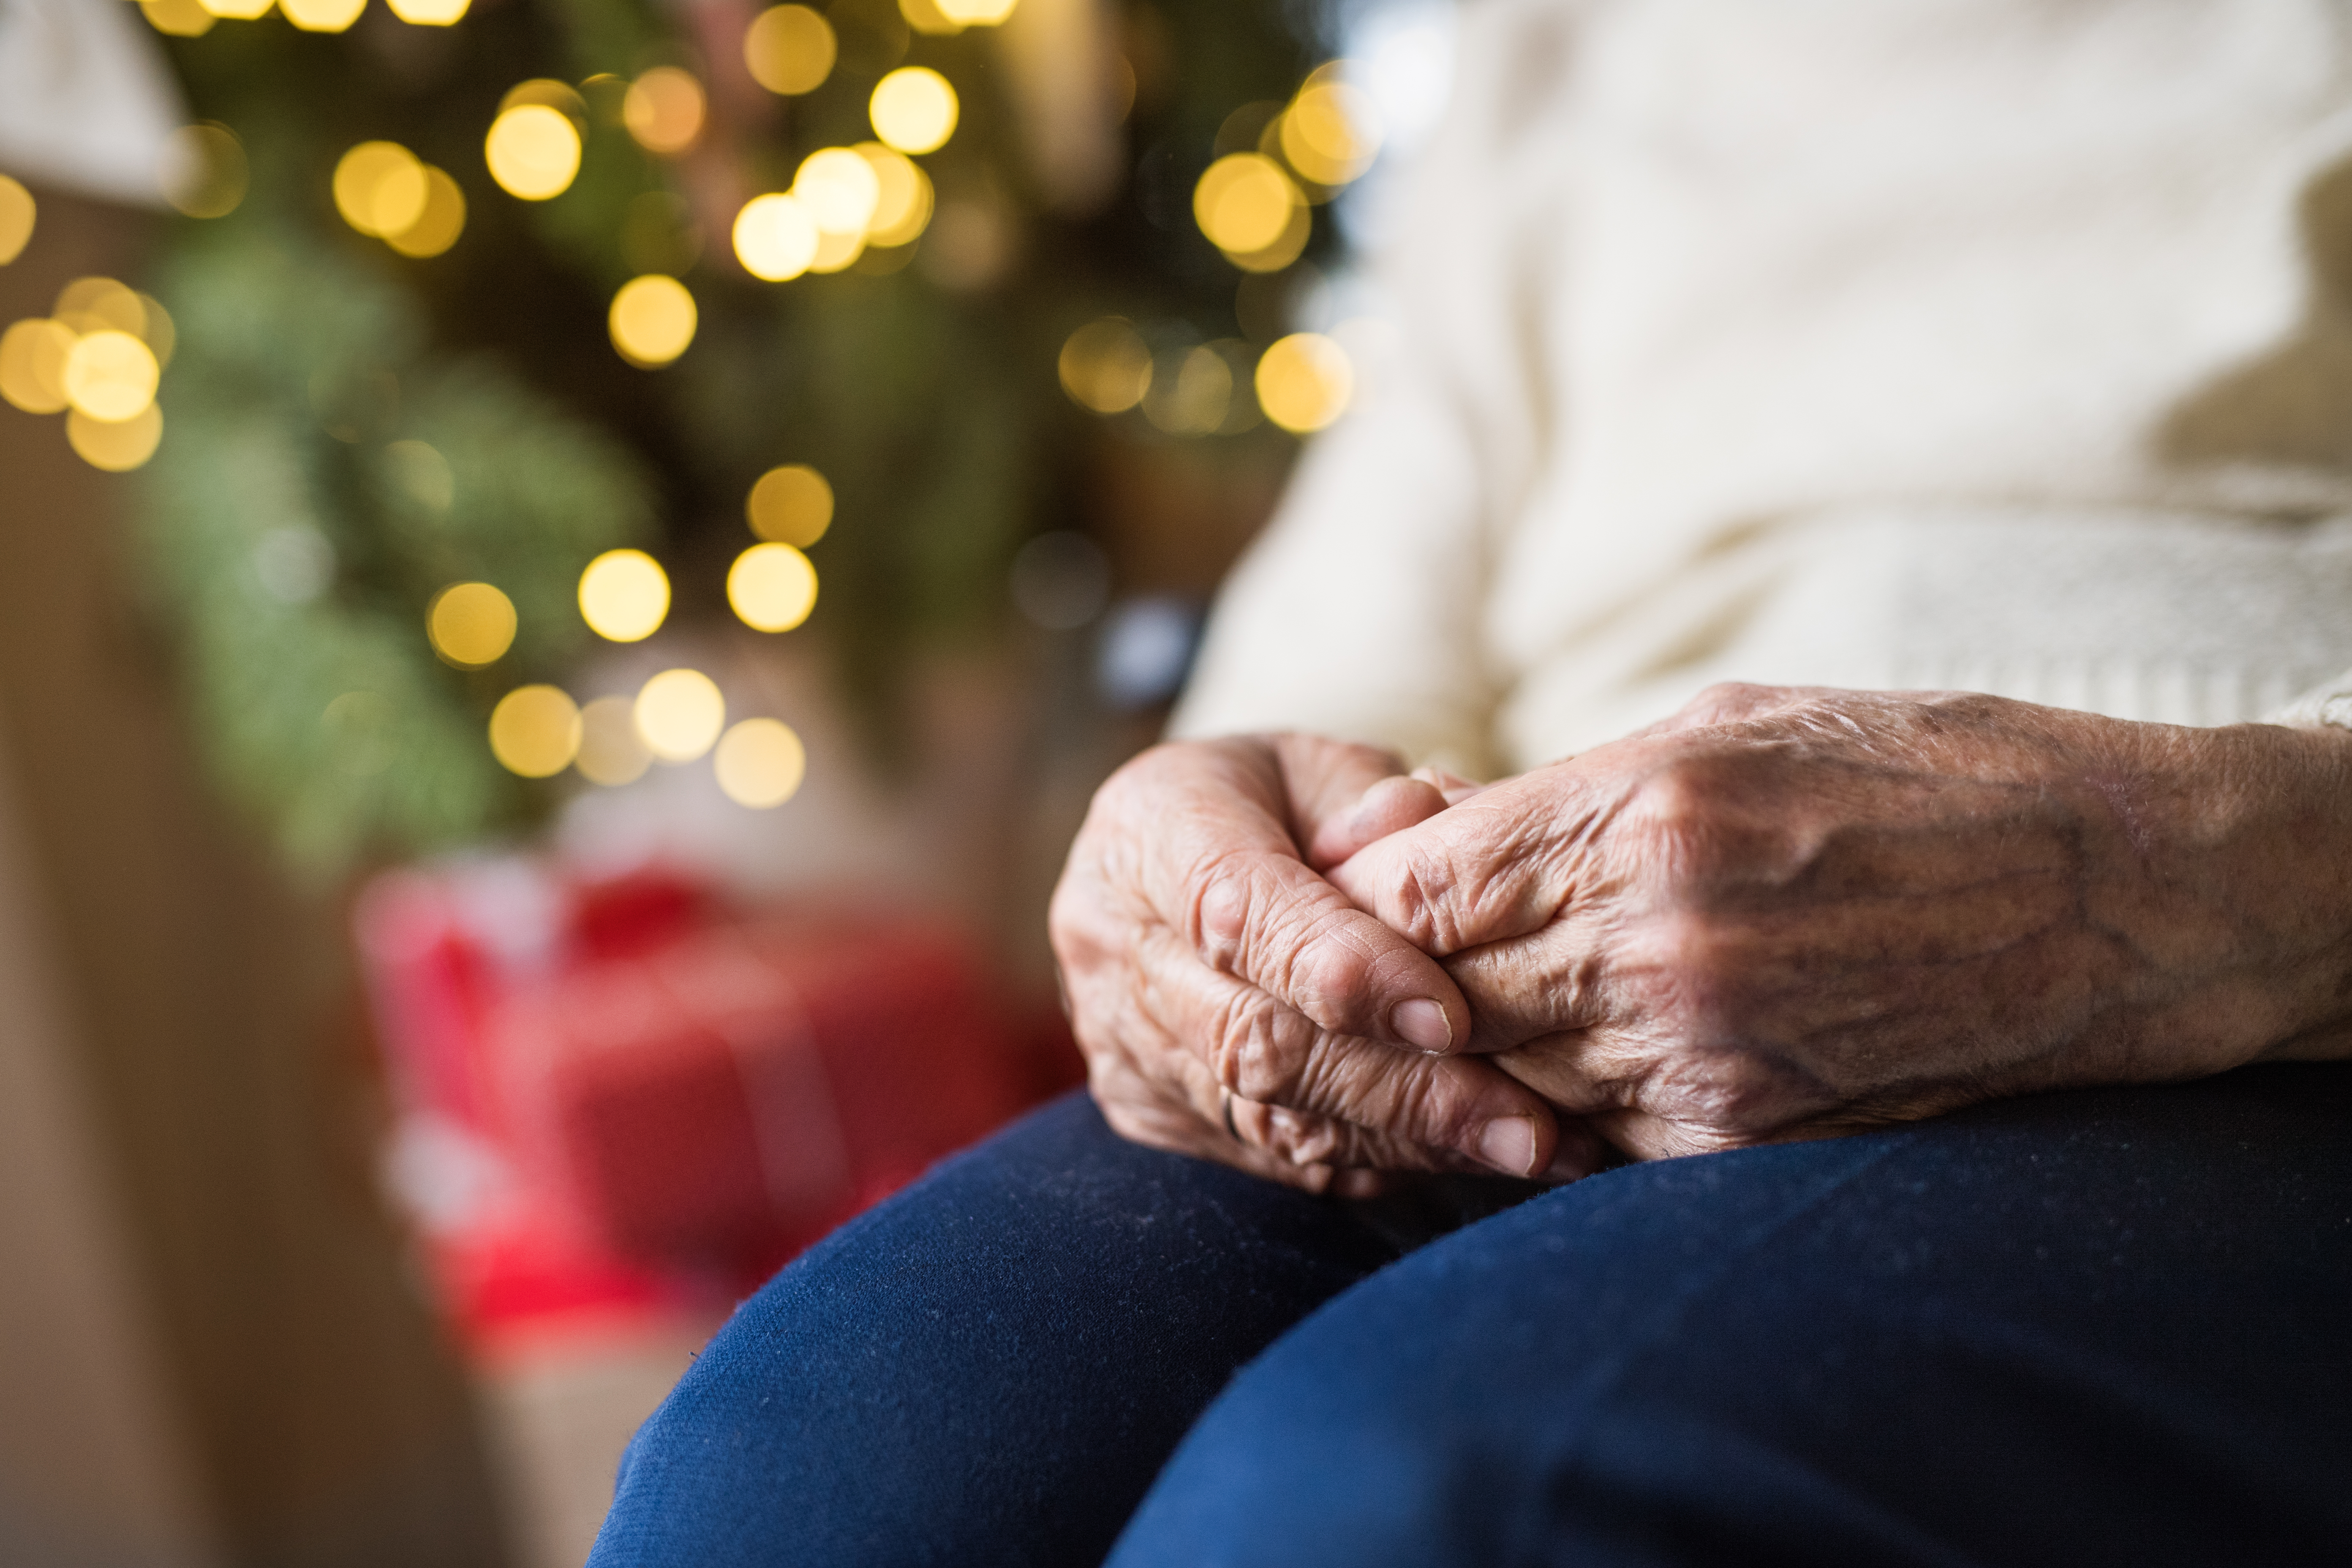 How to Help the Elderly Fight Loneliness this Christmas